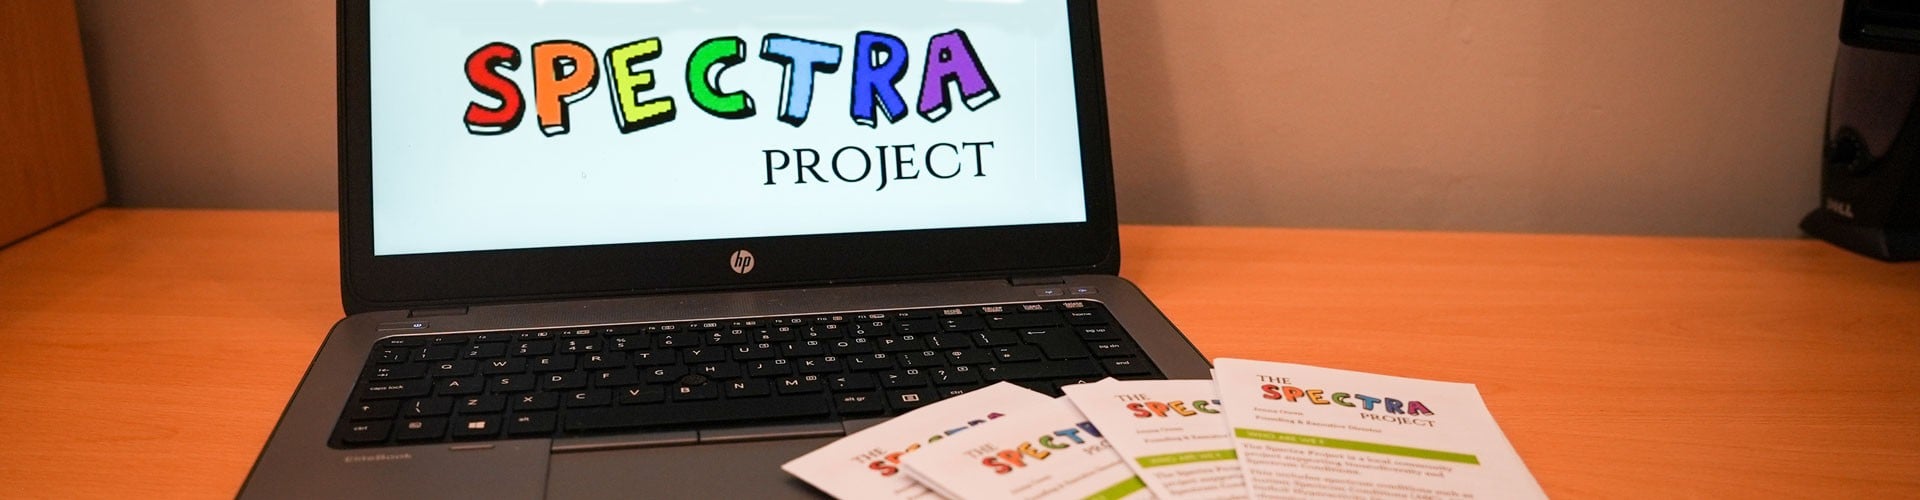 spectra project banner